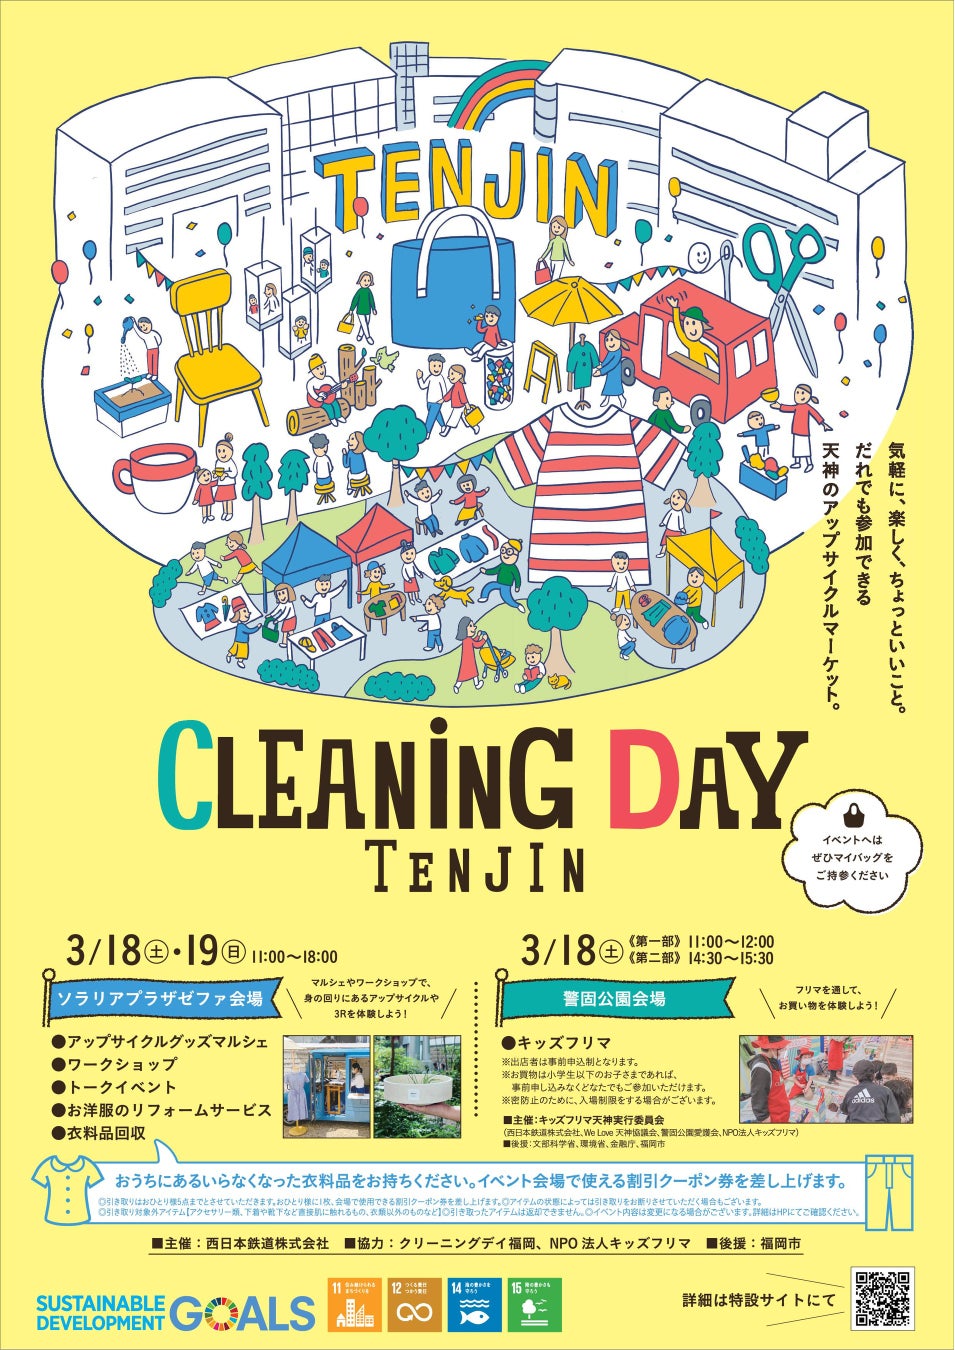 「CLEANiNG DAY TENJIN」を開催いたします！【3/18(土)～3/19(日)】のサブ画像1